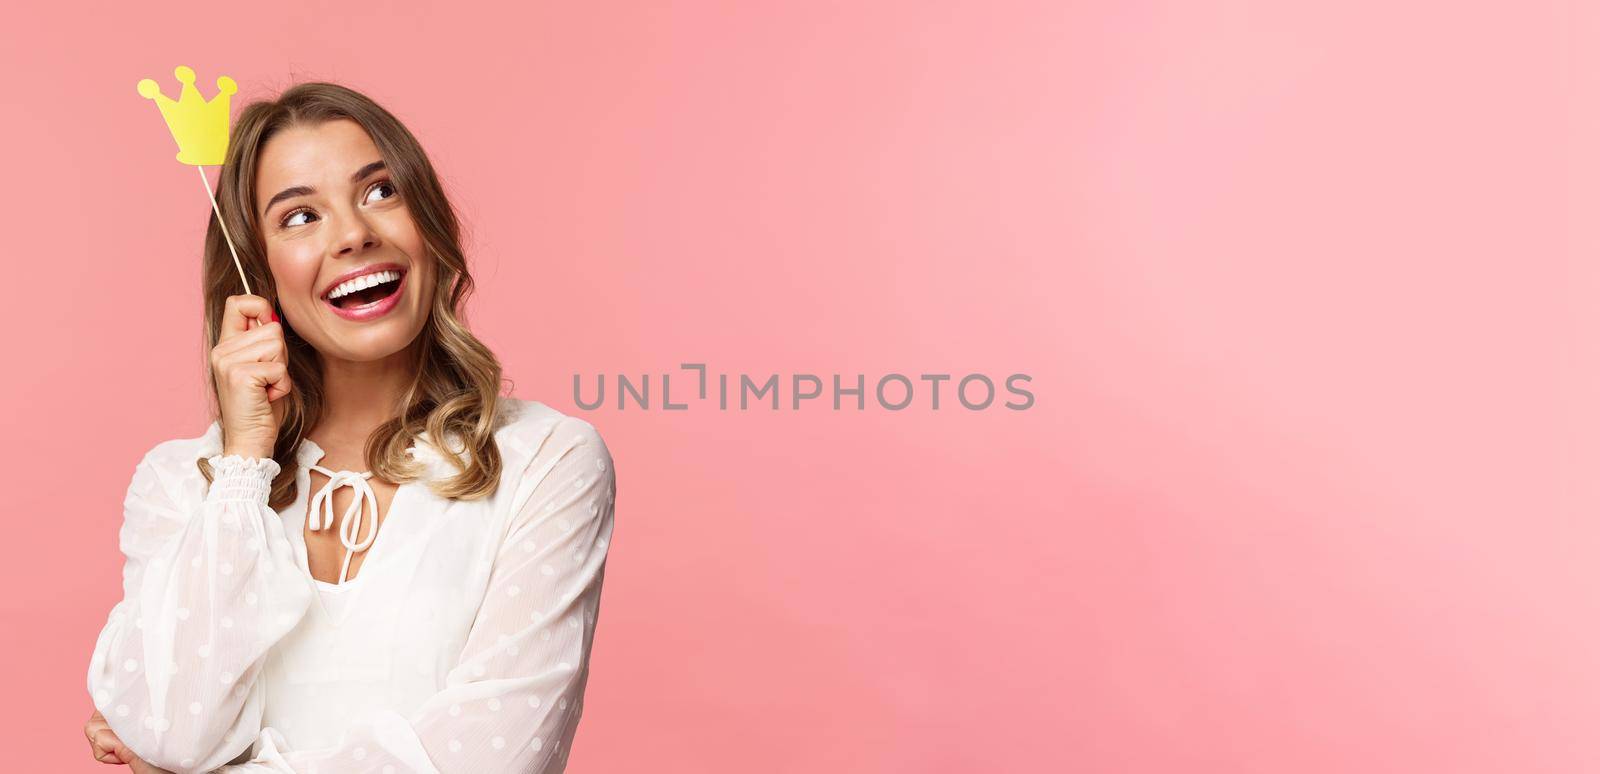 Spring, happiness and celebration concept. Close-up portrait of dreamy beautiful young blond girl imaging something cute and romantic, smiling look up daydreaming with crown on stick, pink background by Benzoix